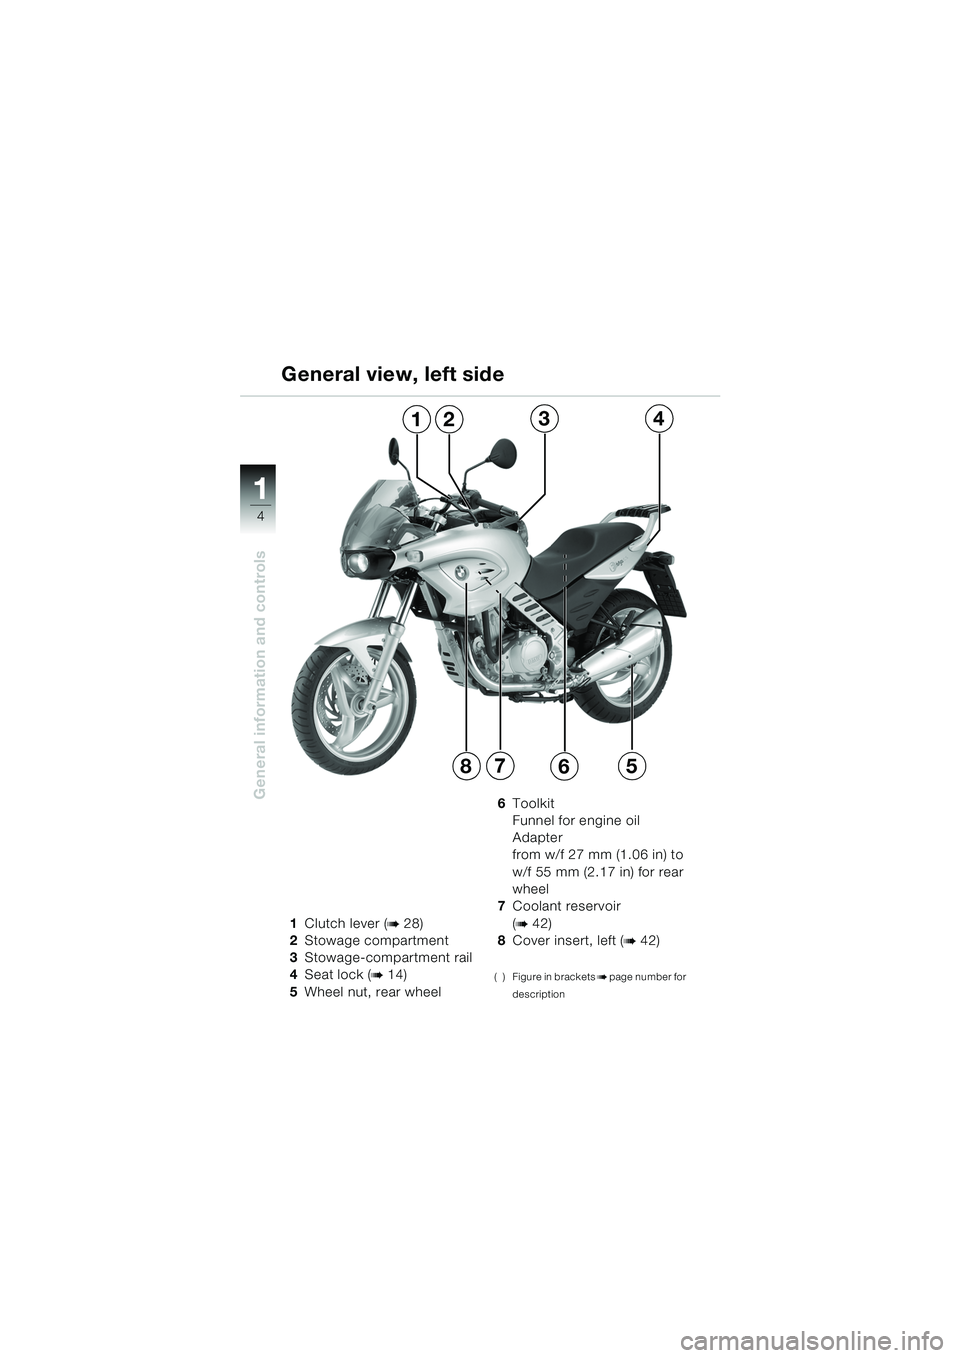 BMW MOTORRAD F 650 CS 2003  Riders Manual (in English) 11
4
General information and controls
1Clutch lever (b28)
2 Stowage compartment
3 Stowage-compartment rail
4 Seat lock (
b14)
5 Wheel nut, rear wheel 6
Toolkit
Funnel for engine oil
Adapter 
from w/f 